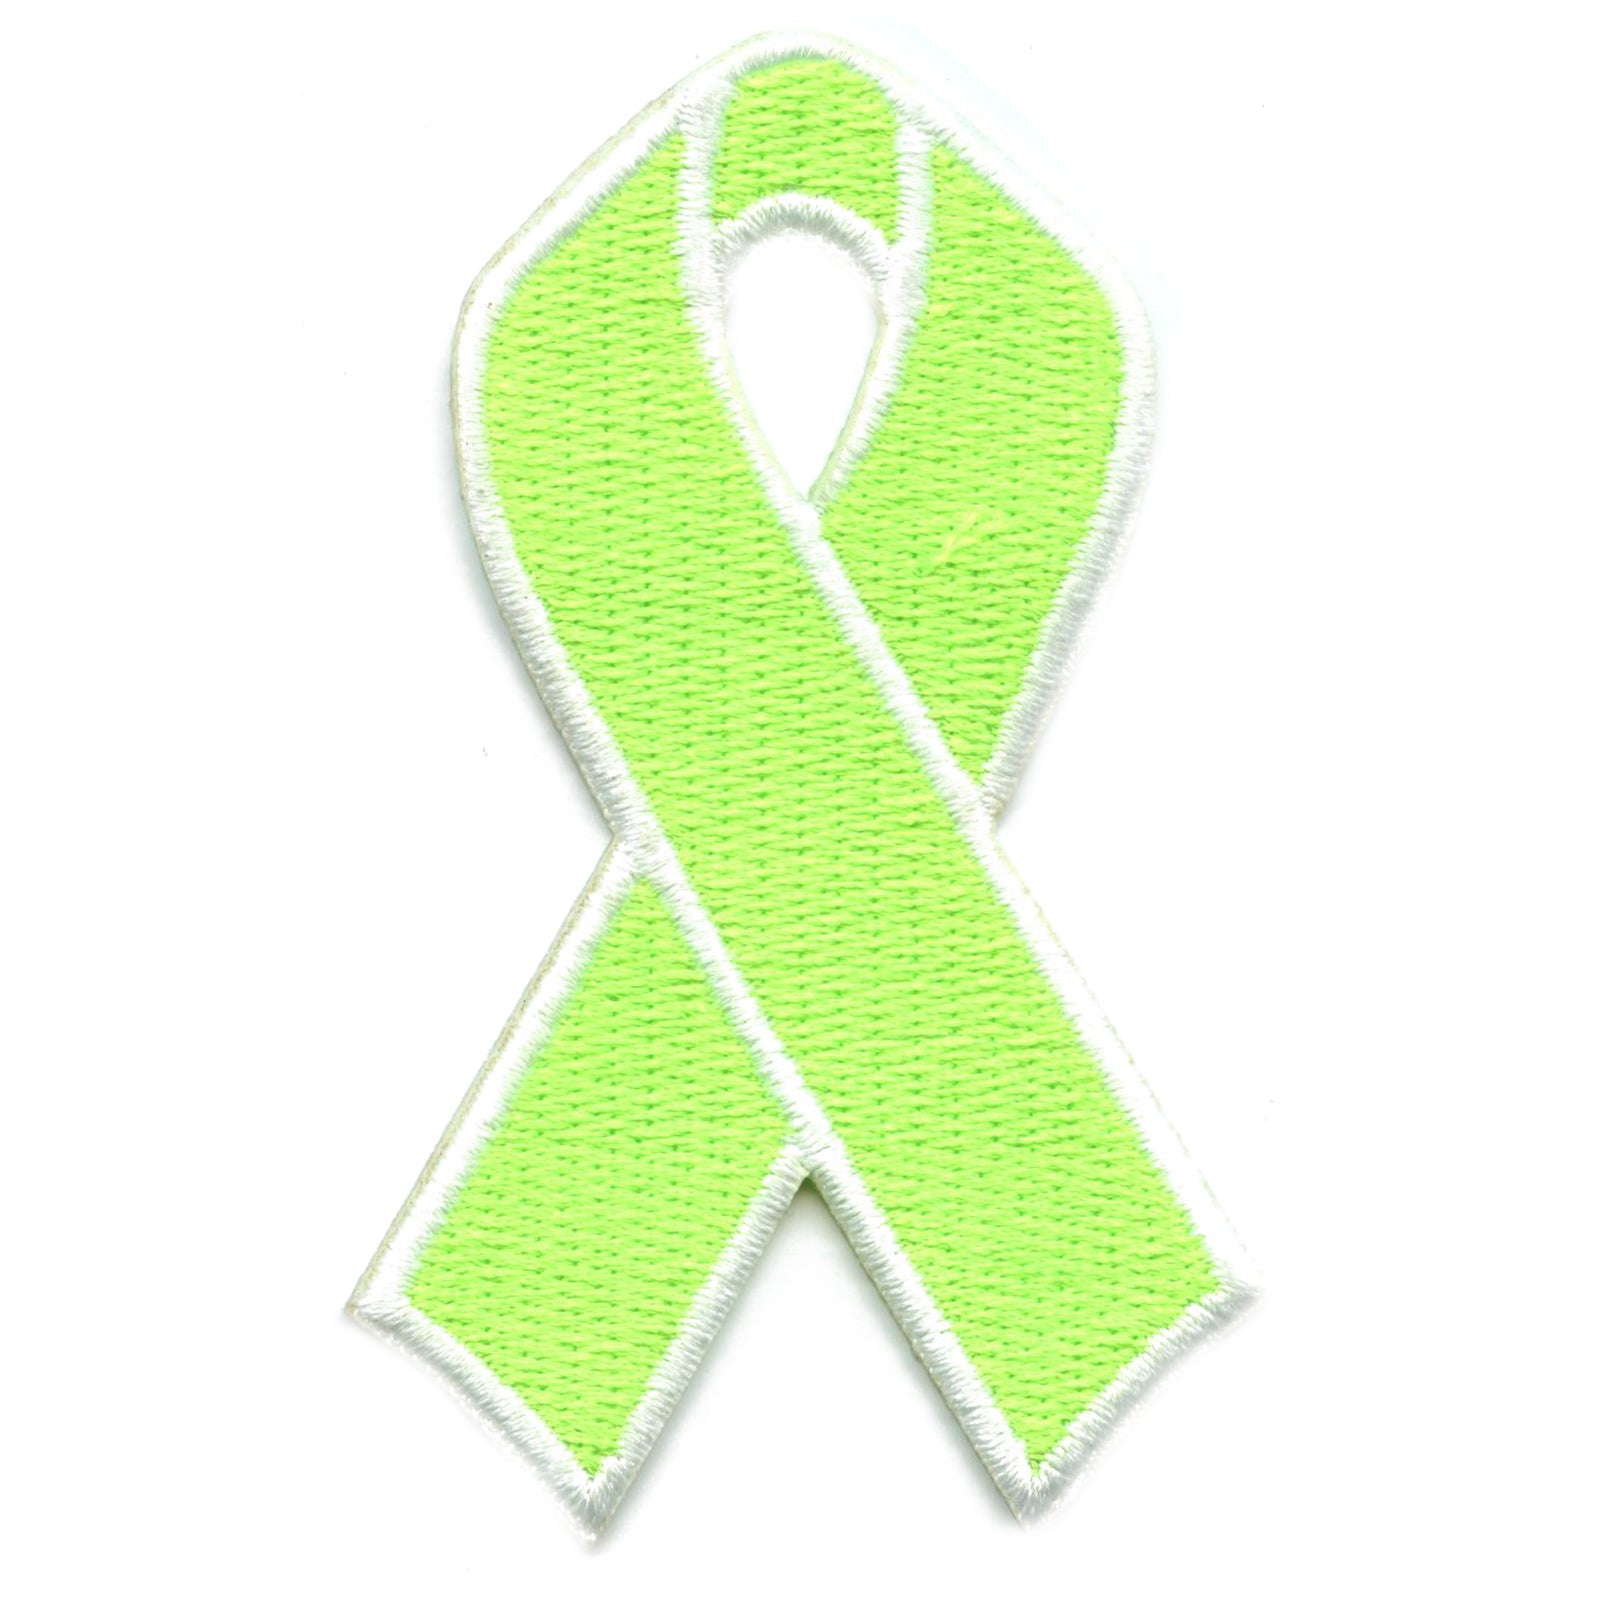 Cancer Awareness Ribbons Fully Embroidered Iron on Patches Lymphoma Cancer